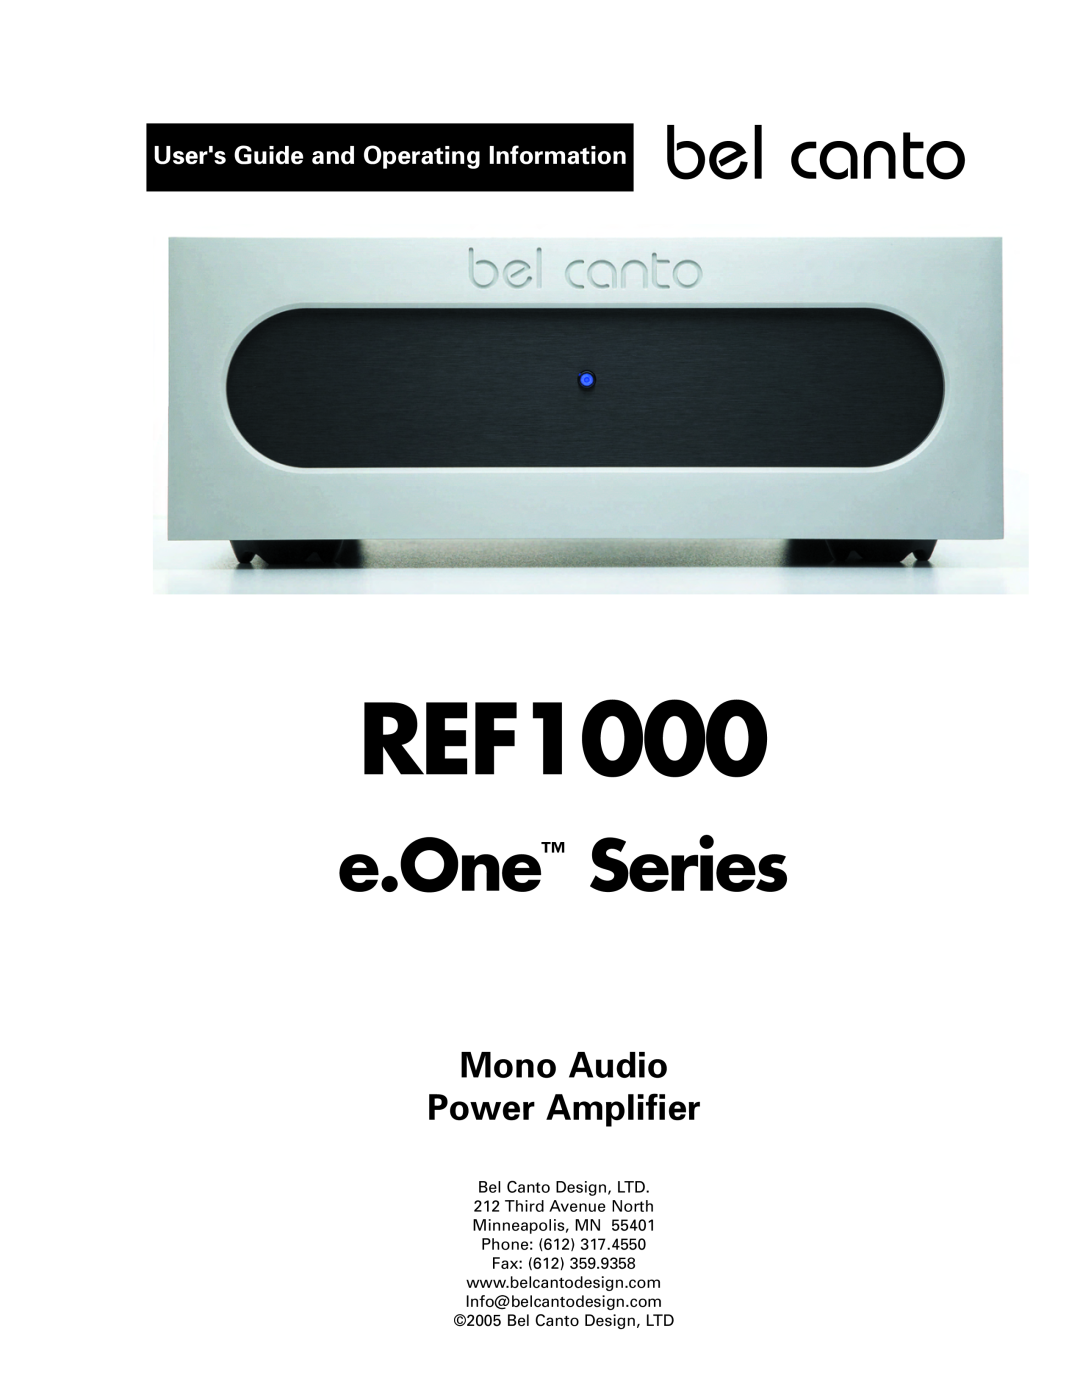 Bel Canto Design REF1000 manual Users Guide and Operating Information, e.One Series, Mono Audio Power Amplifier 